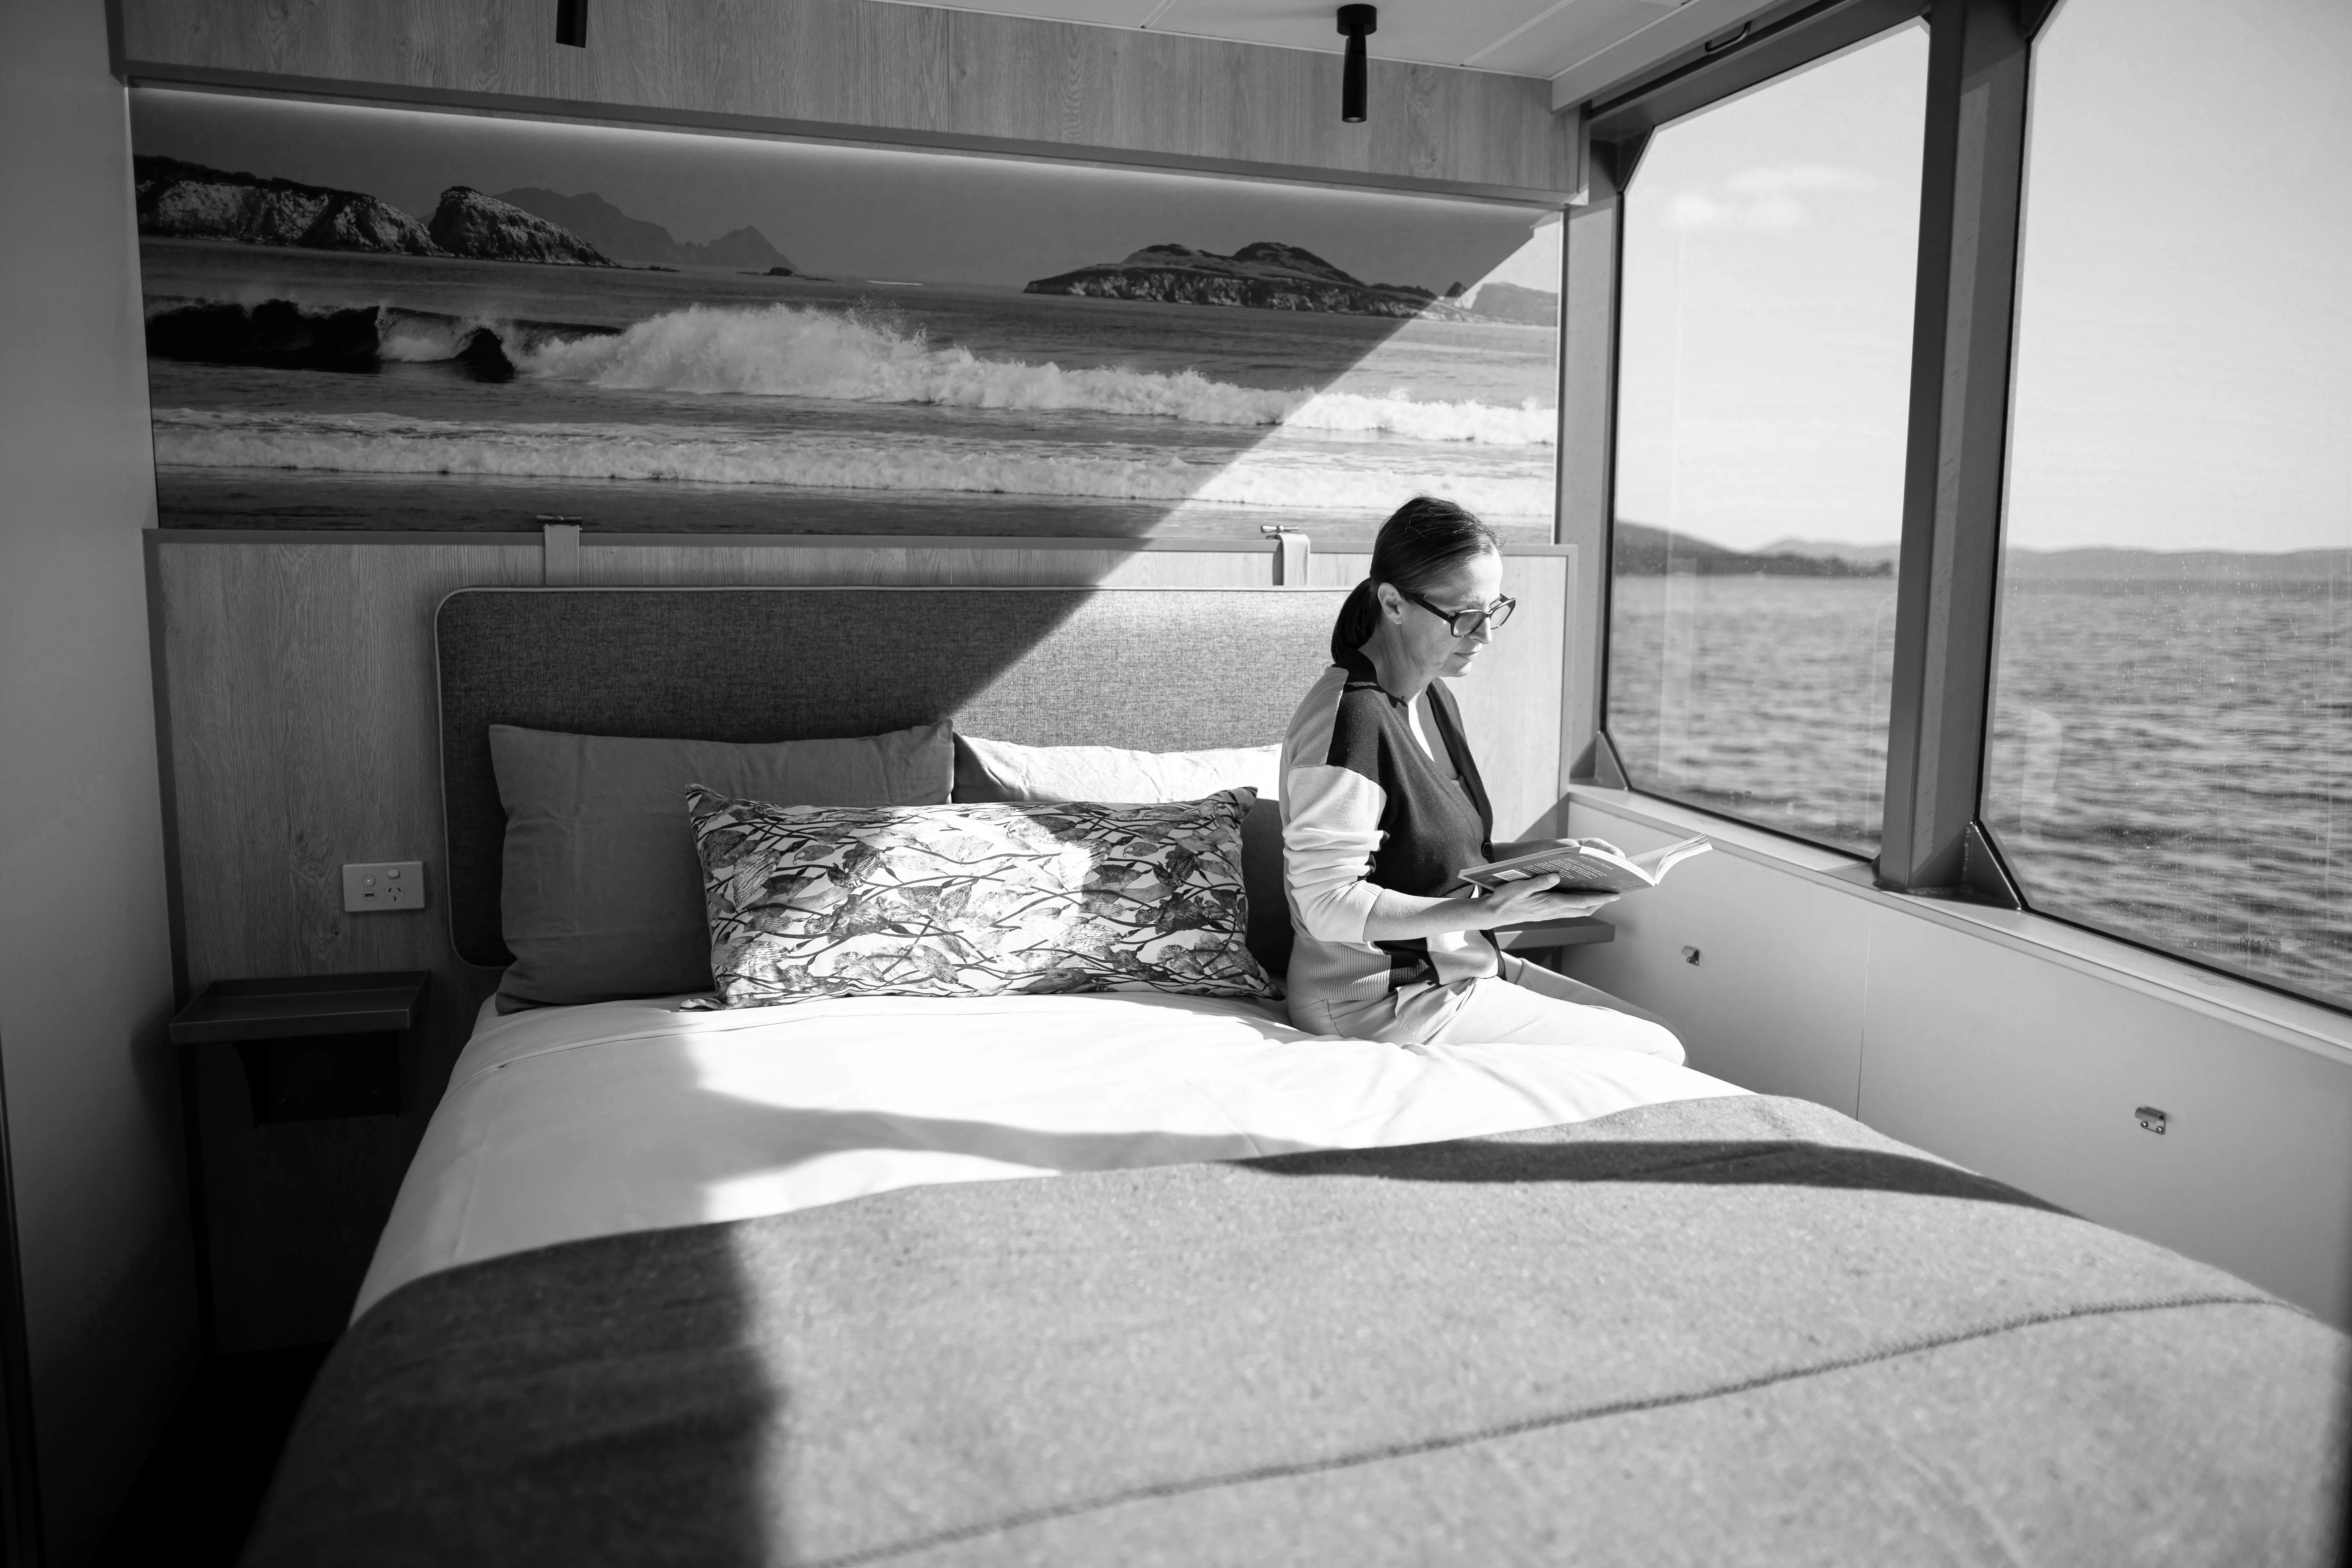 A woman sits on a large bed by the large windows of a boat on calm waters.